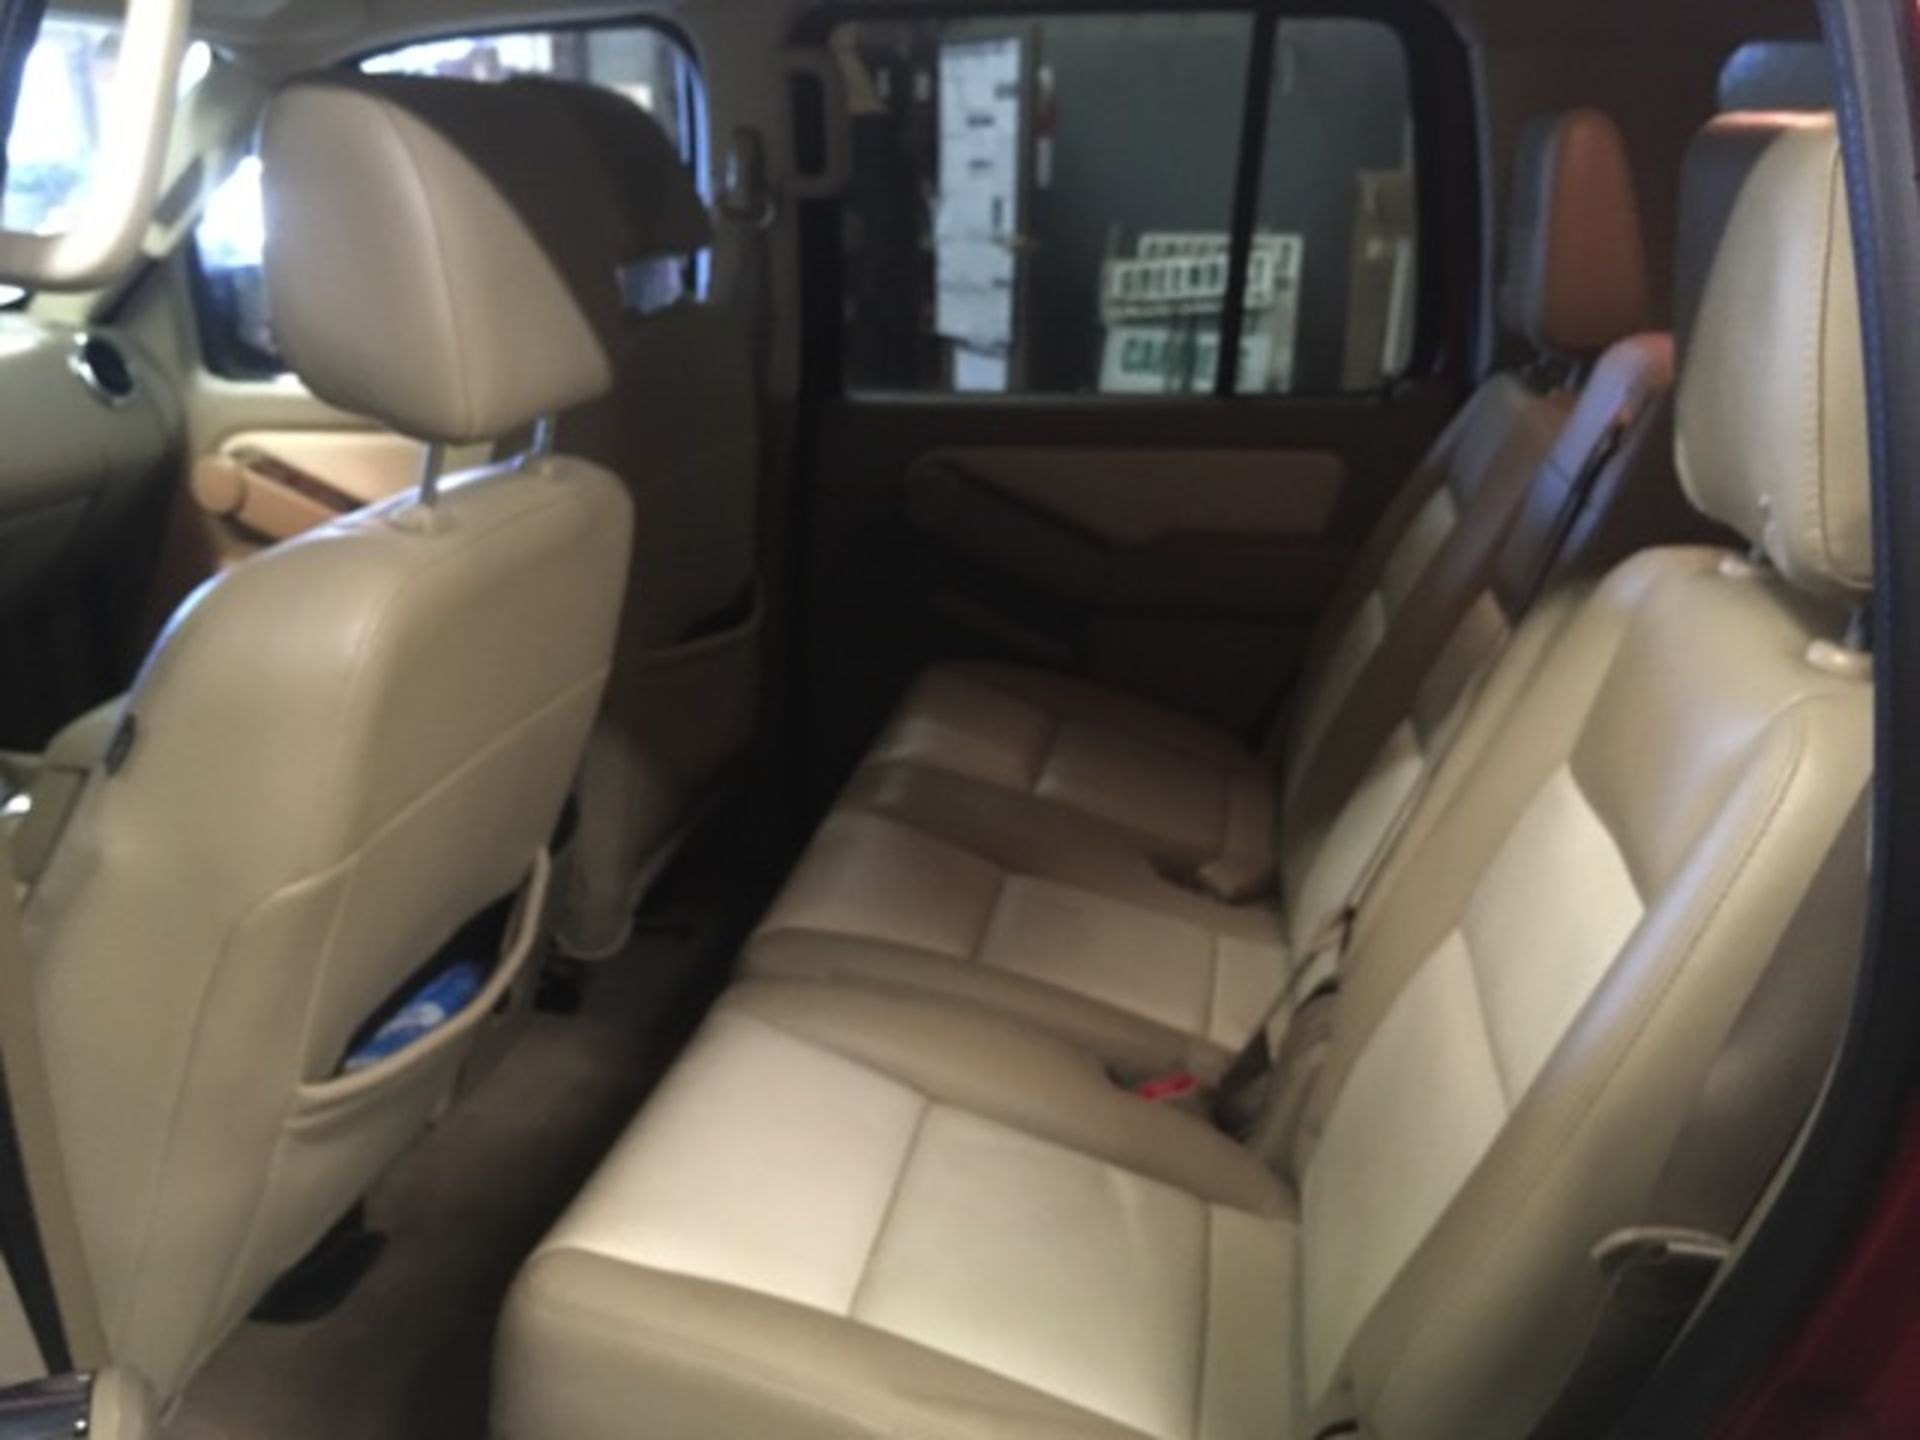 2007 Ford Explorer Eddie Bauer, Auto Trans, 4.6L V8, Wood Trim, Two Tone Paint, 3rd Row Seat, - Image 6 of 22